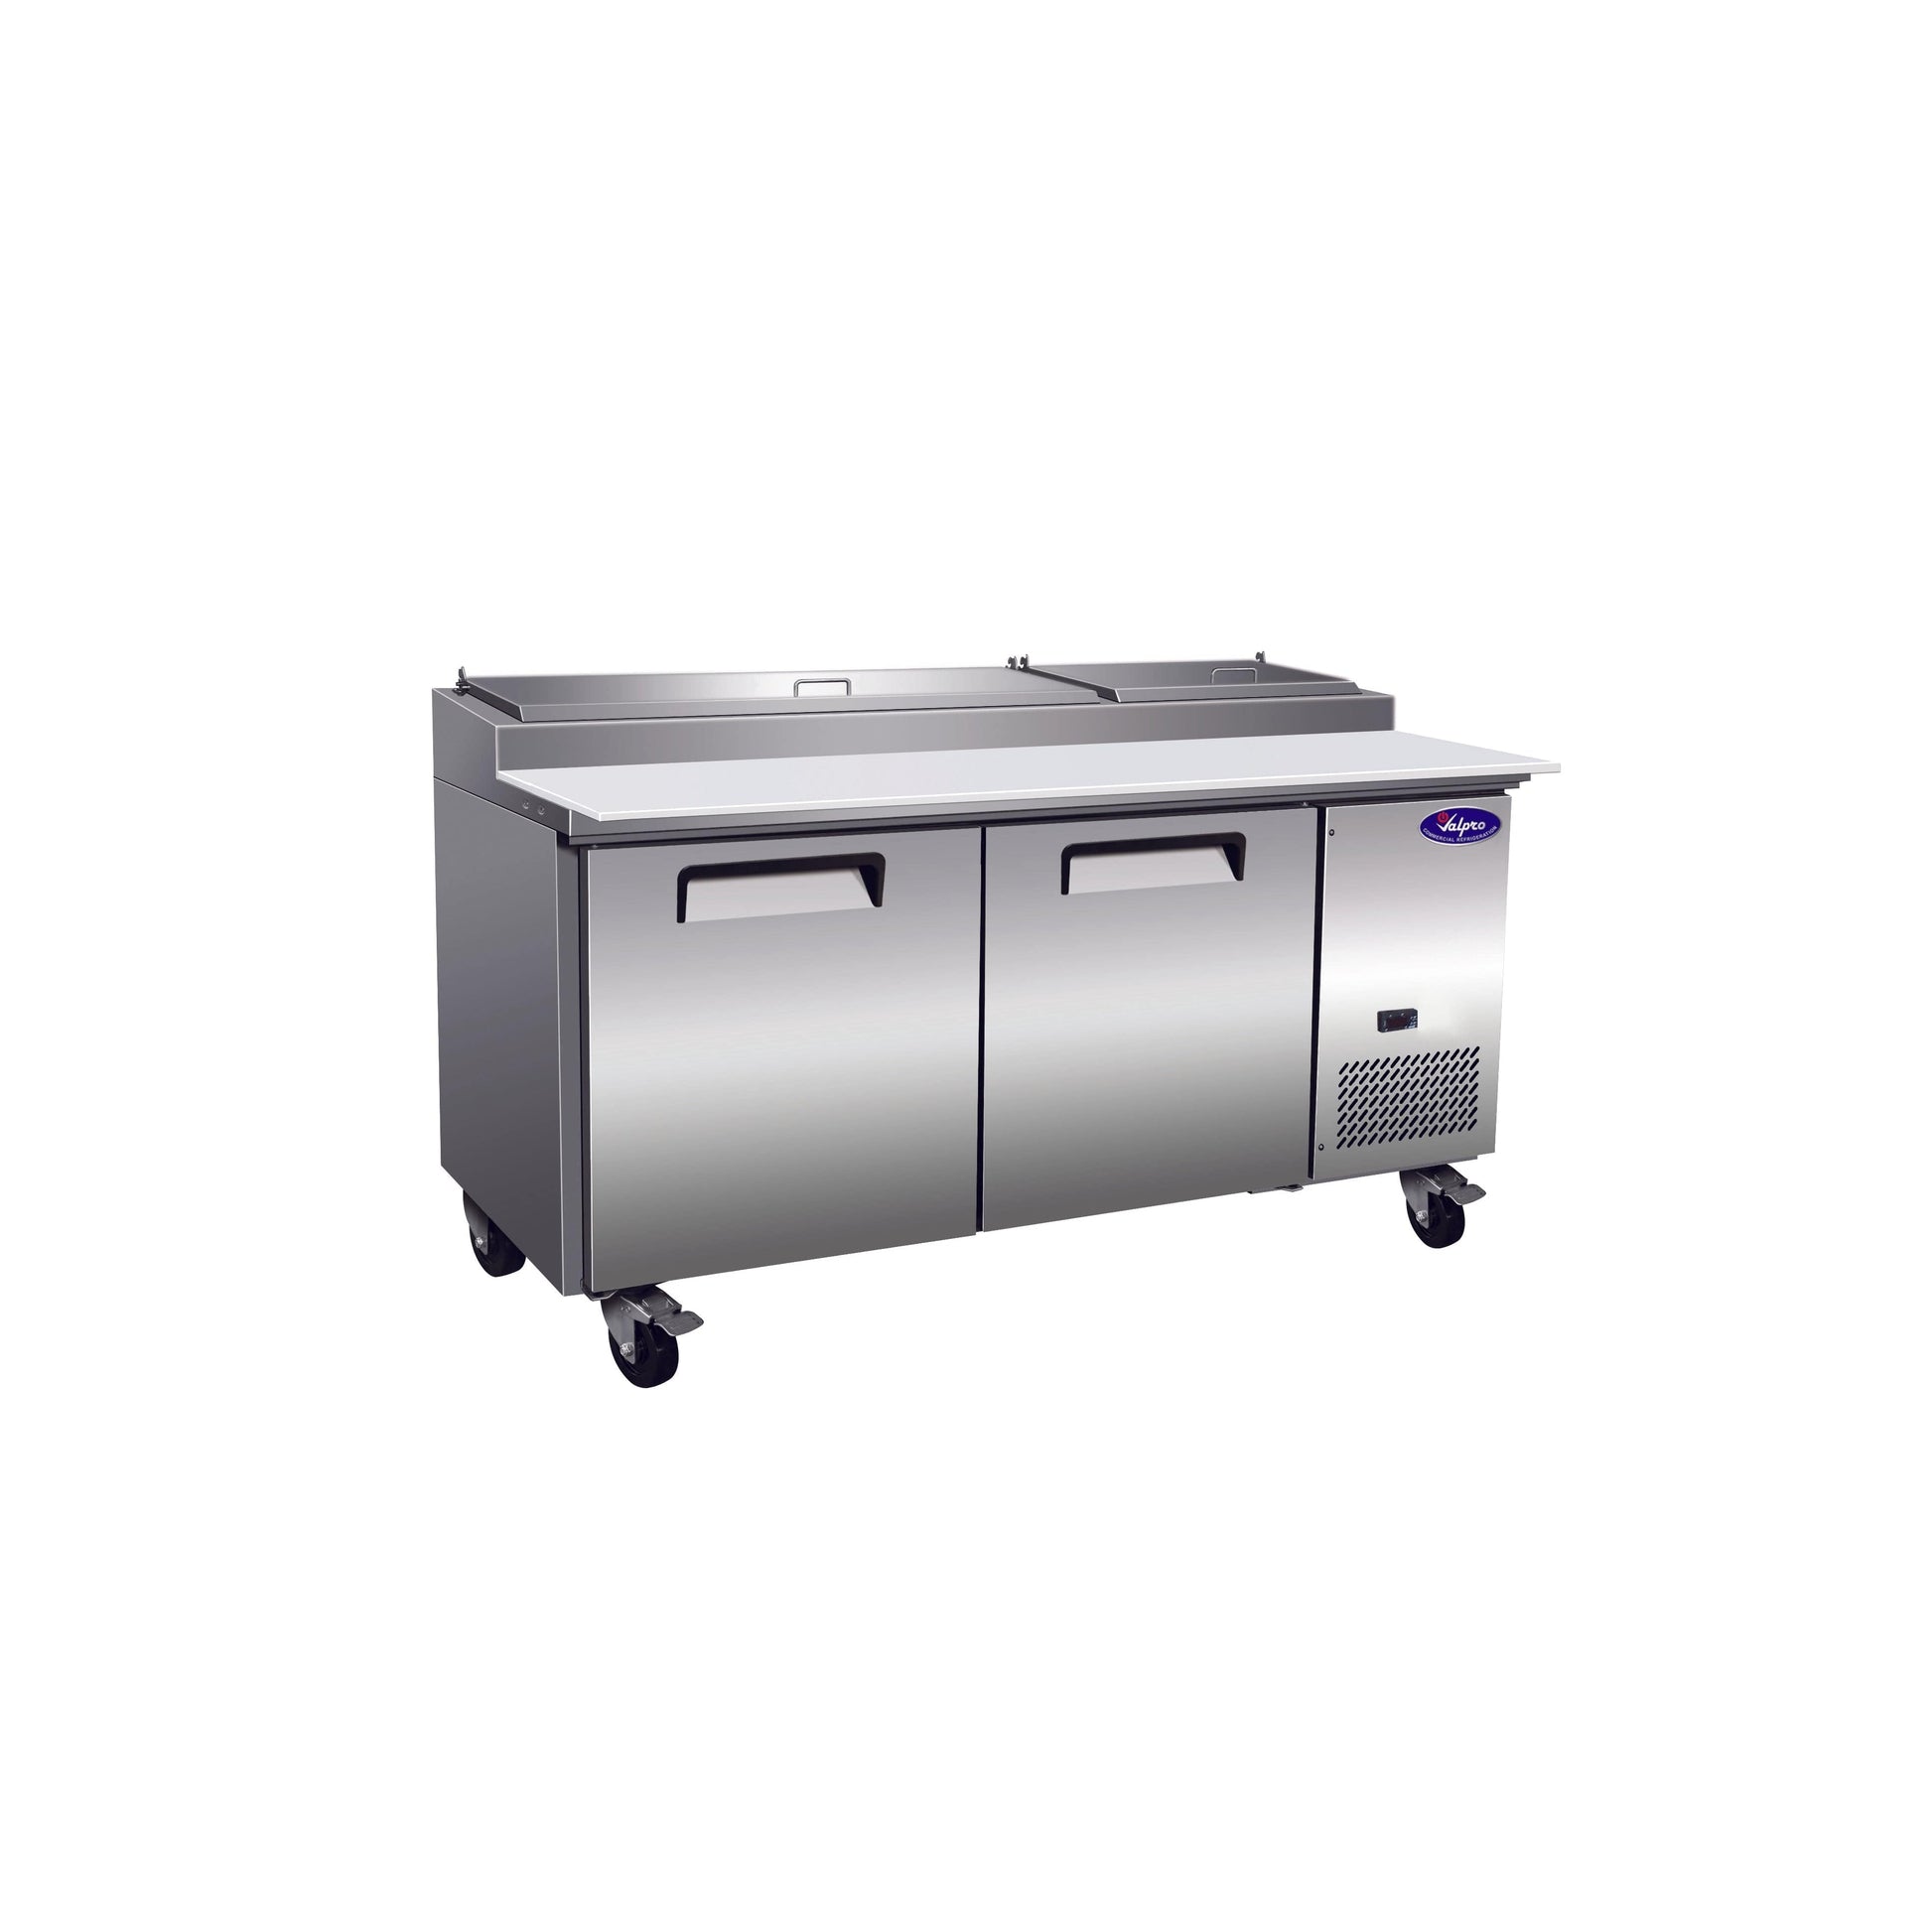 Valpro 71" x 32" Stainless Steel Solid 2-Door Refrigerator With 9-Pan Pizza Preparation Table Top